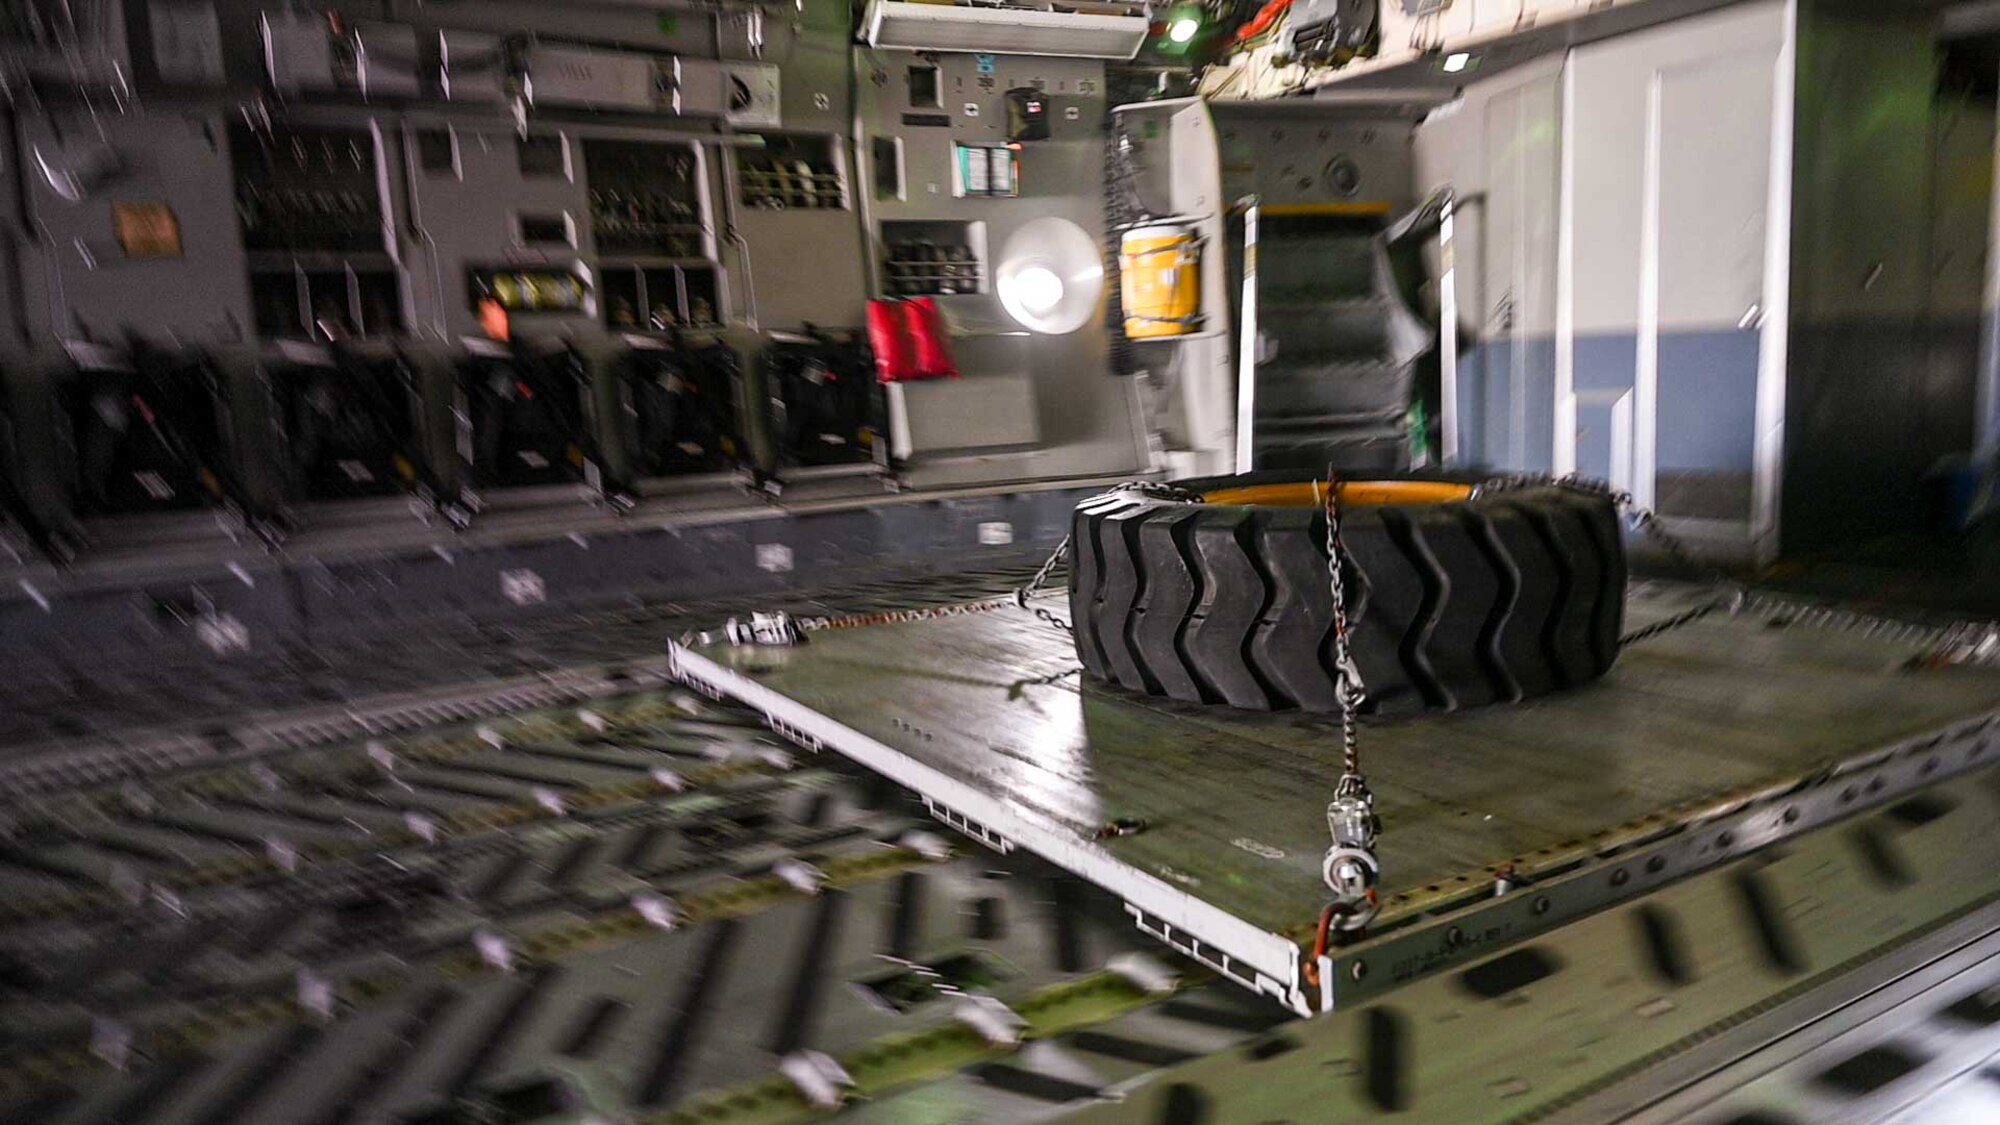 A palletized tire moves during a combat offload on a C-17 Globemaster III during a local training mission at Dover Air Force Base, Delaware, May 24, 2022. The tire pallet is used for combat offload exercises to maintain the readiness of 3rd Airlift Squadron Airmen who regularly train to provide global reach and support global engagement with time-critical theater assets. (U.S. Air Force photo by Senior Airman Faith Schaefer)